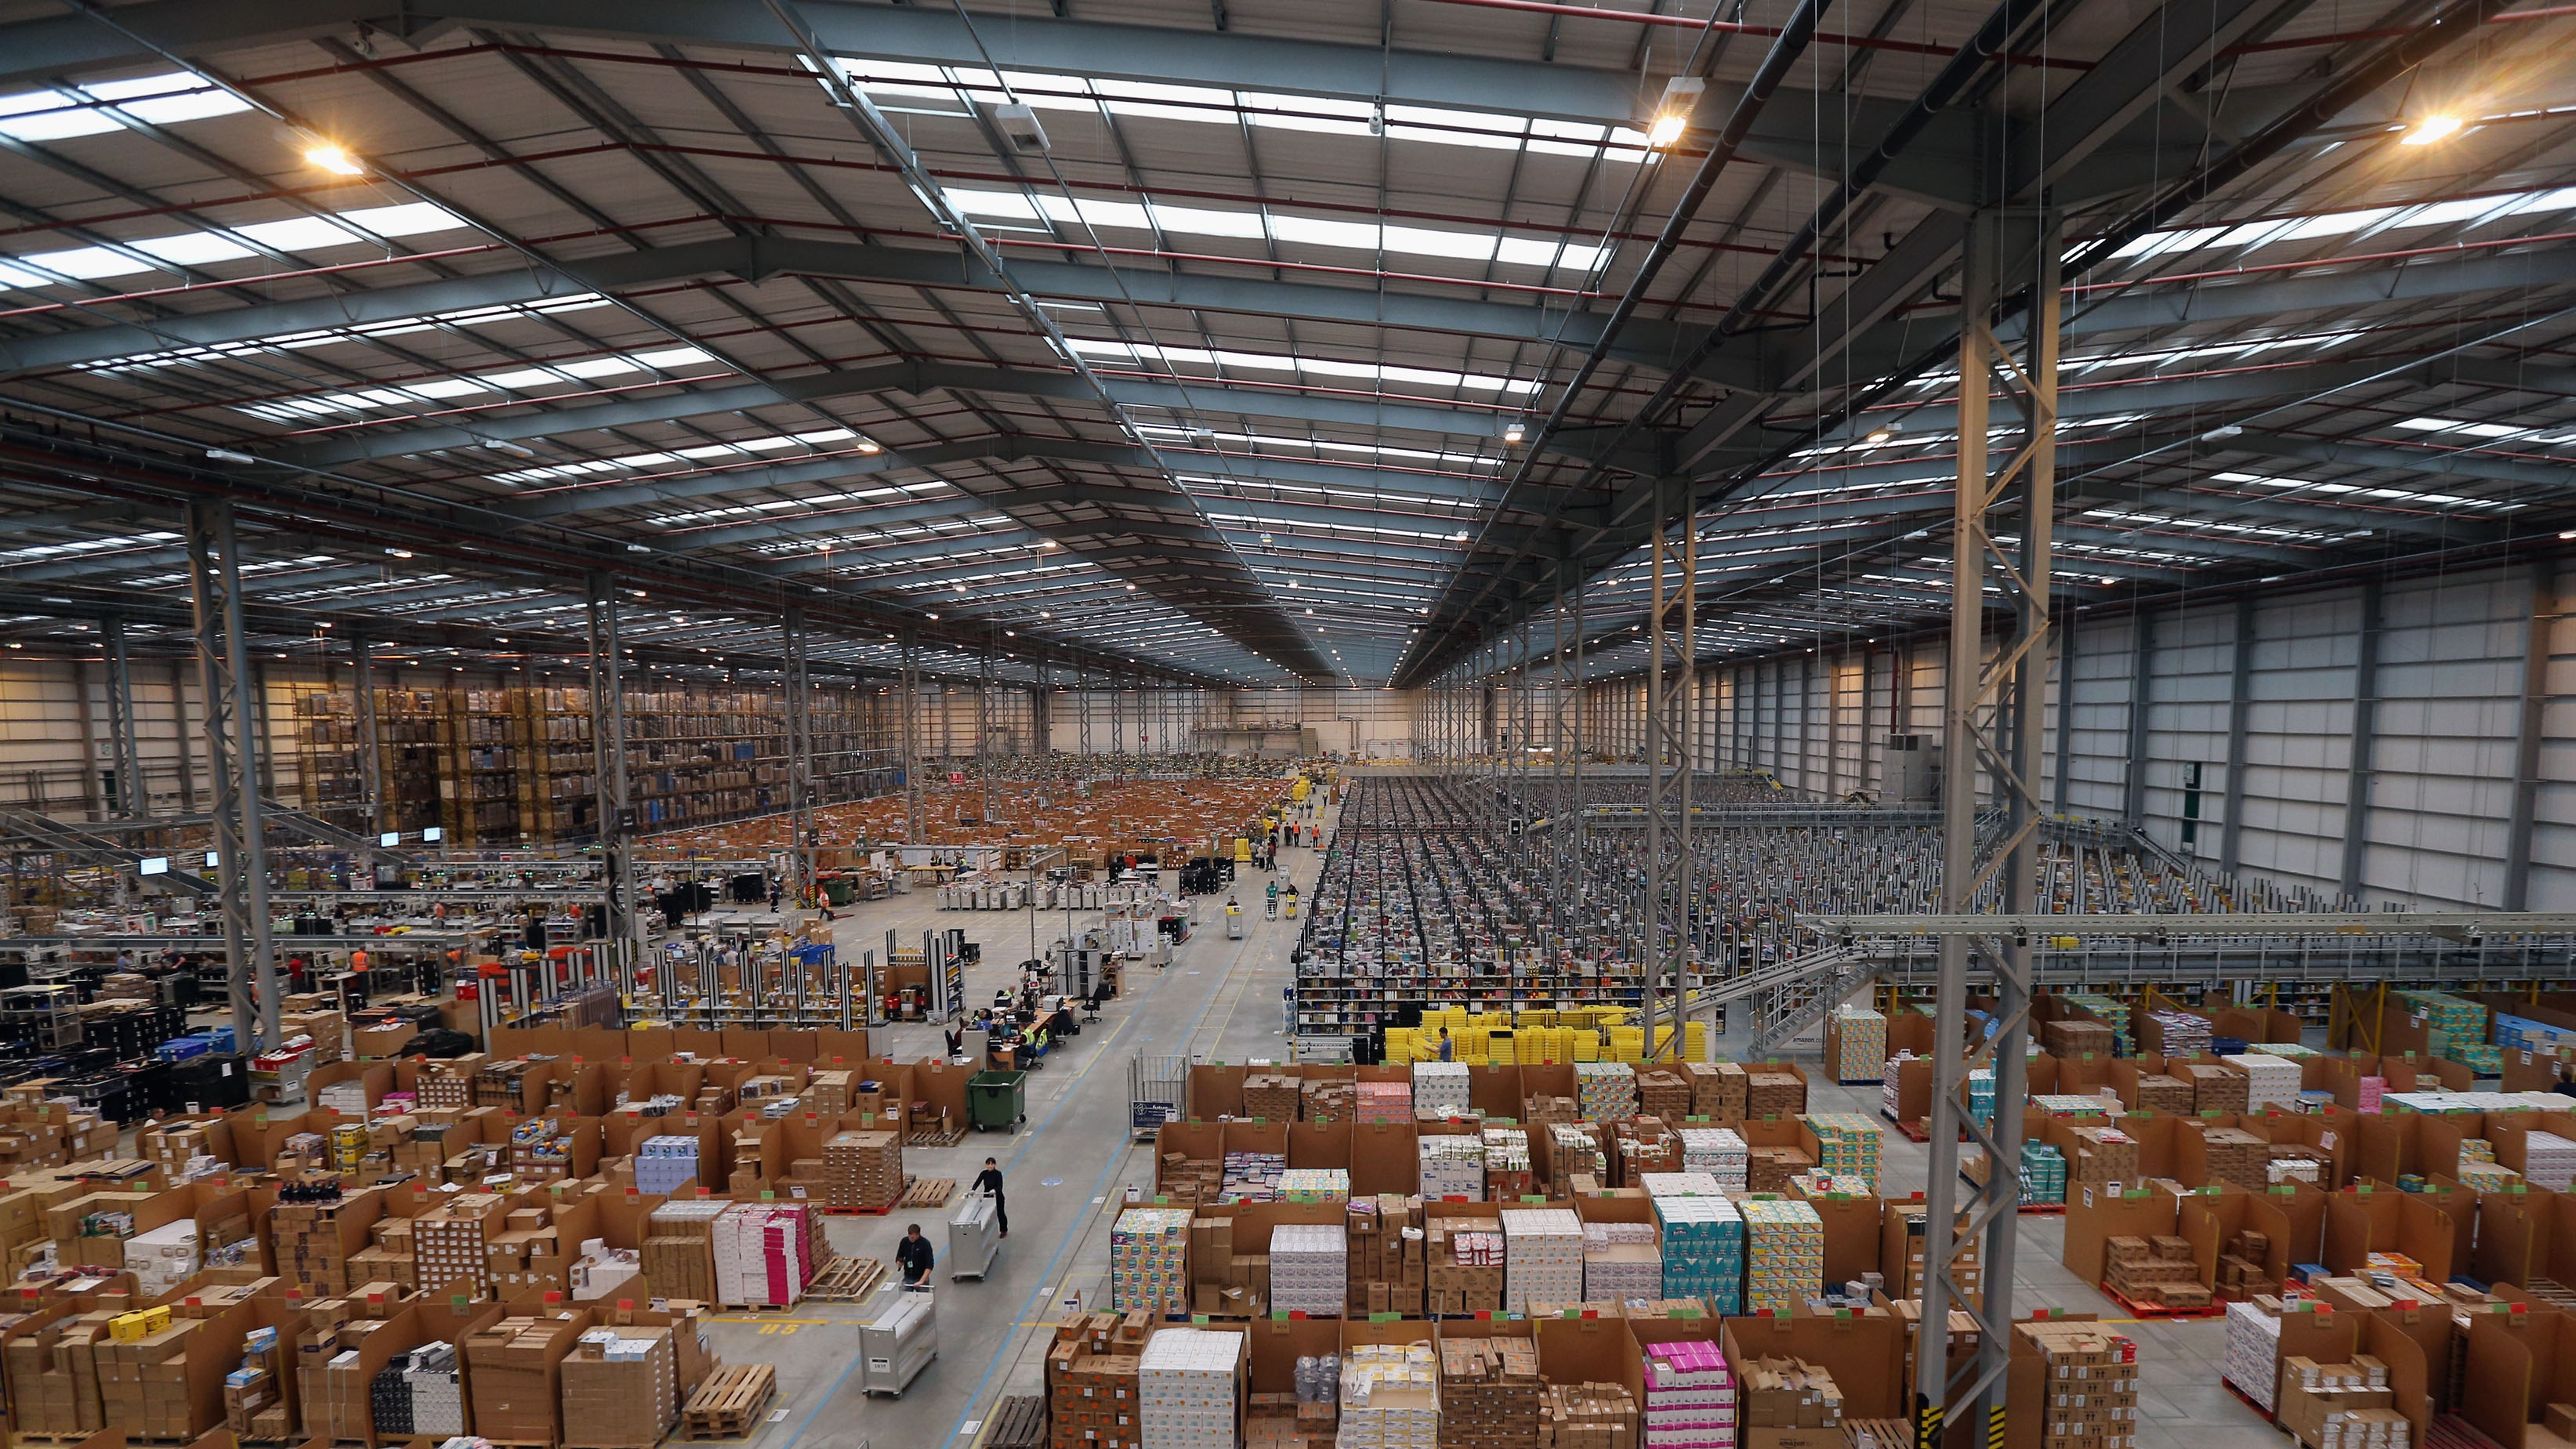 Warehouse space in high demand as e-commerce booms - Marketplace